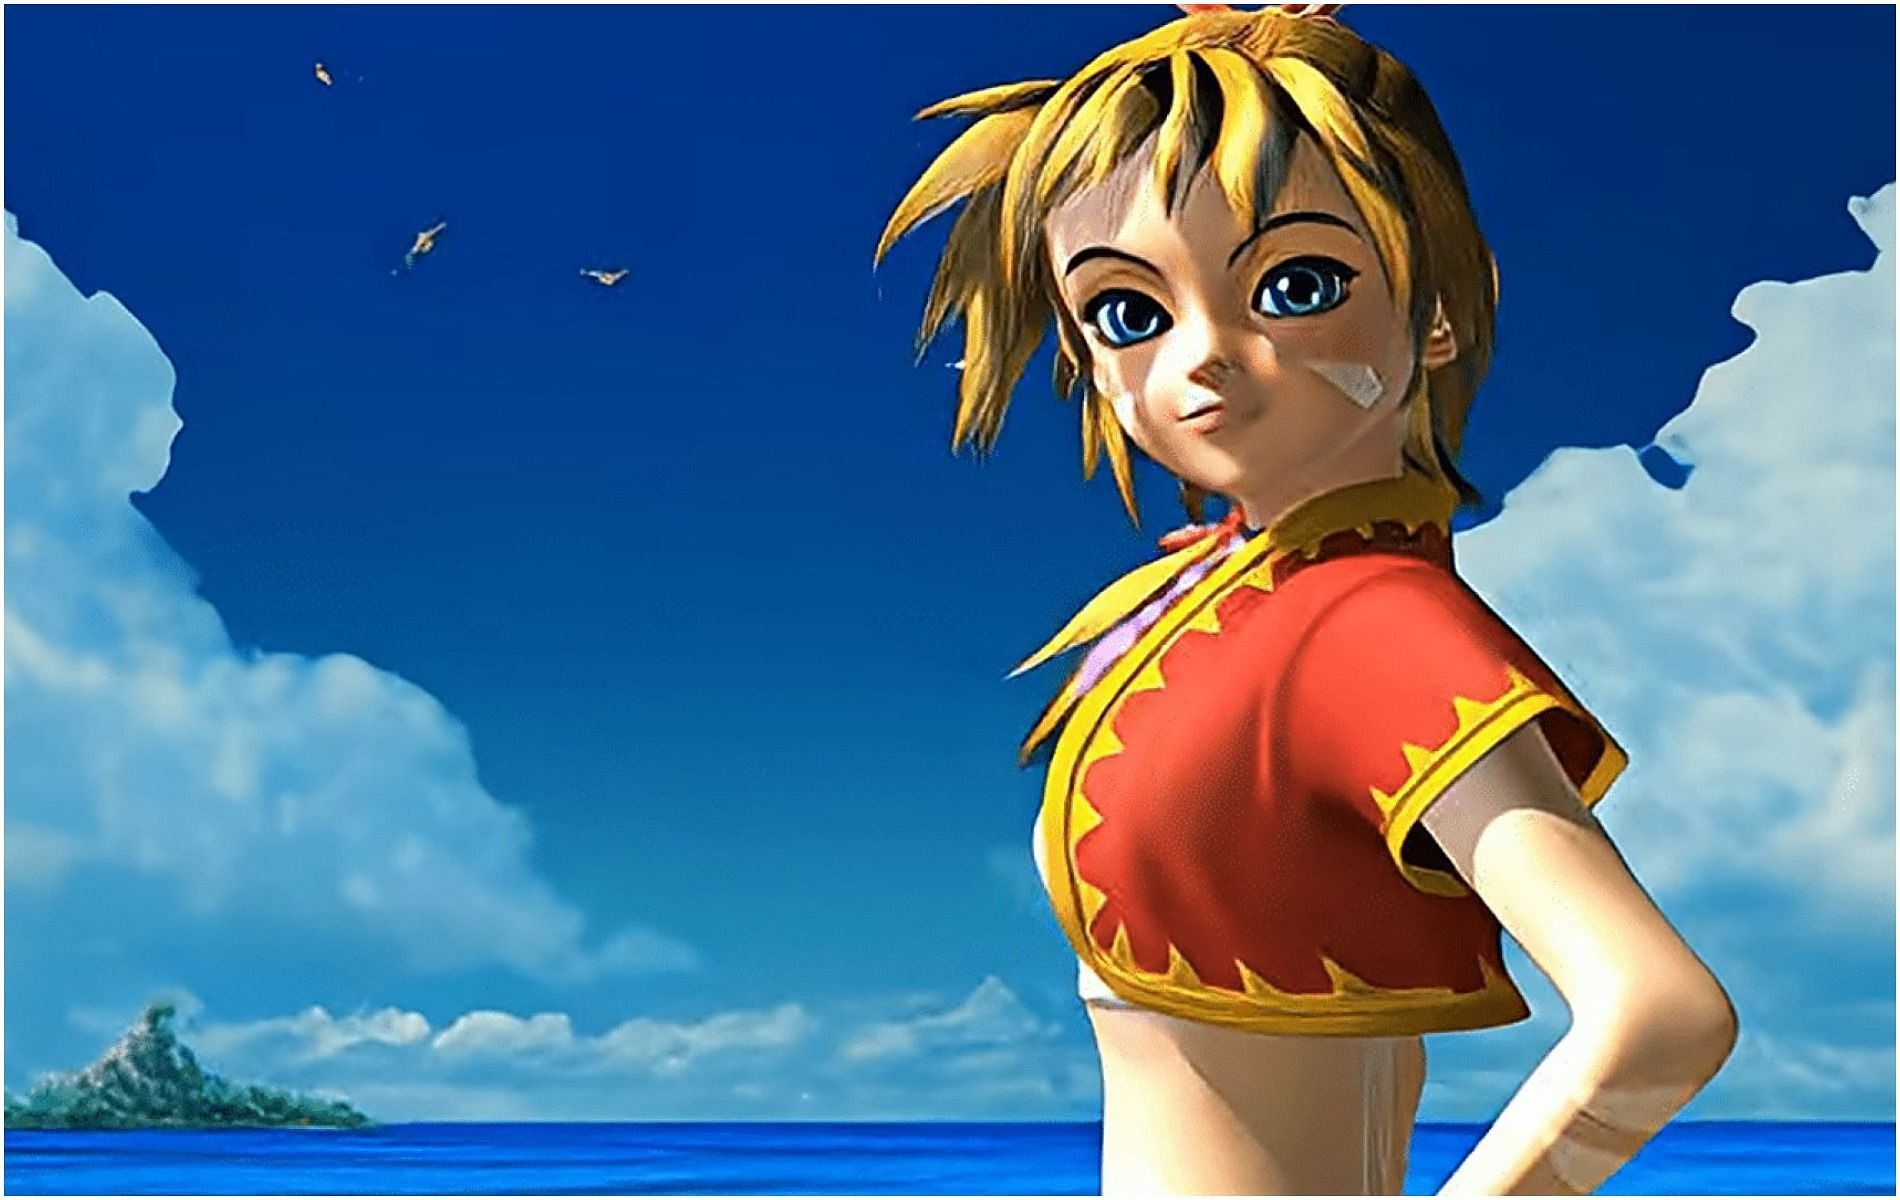 Chrono Cross: The Radical Dreamers Edition is almost here, and fans can finally see it in action (Image via Square Enix)